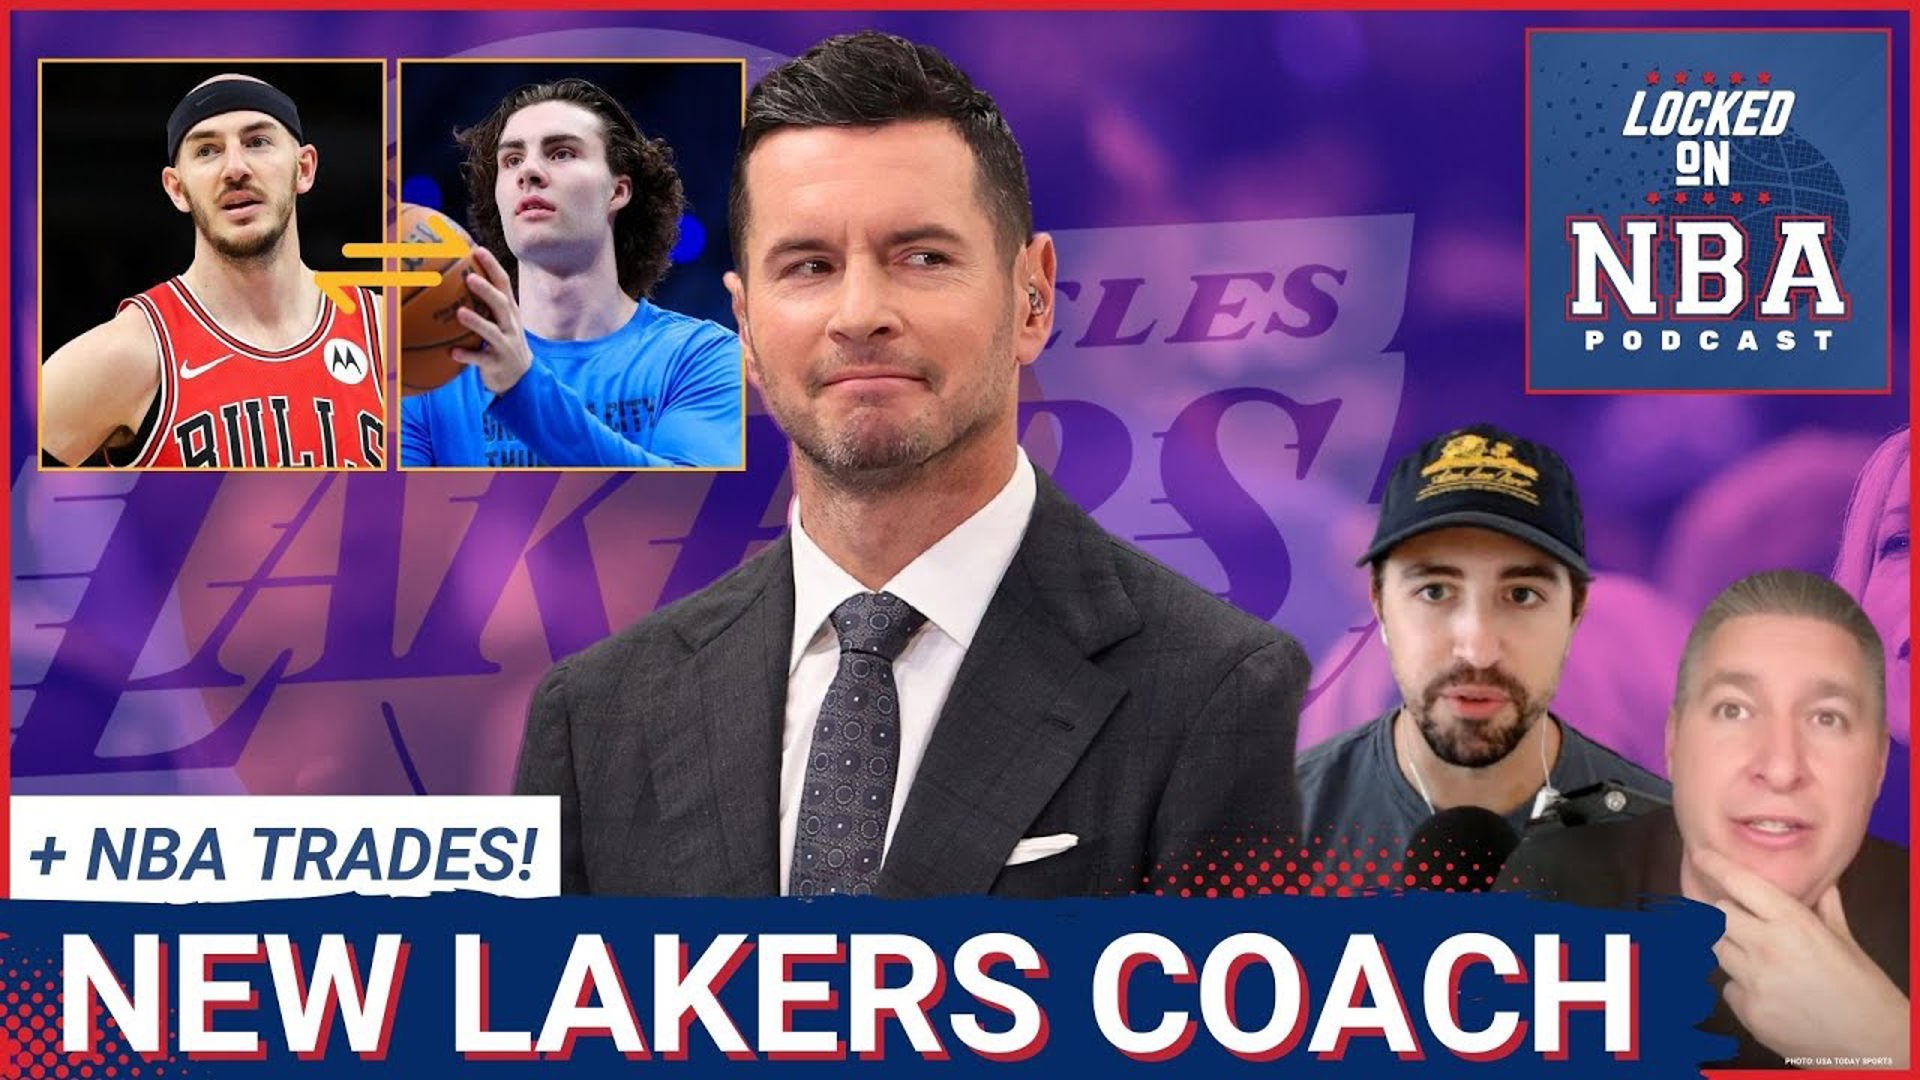 The Lakers have finally hired their head coach. Can JJ Redick be the next Pat Riley? Plus we have our first official trade of the offseason.